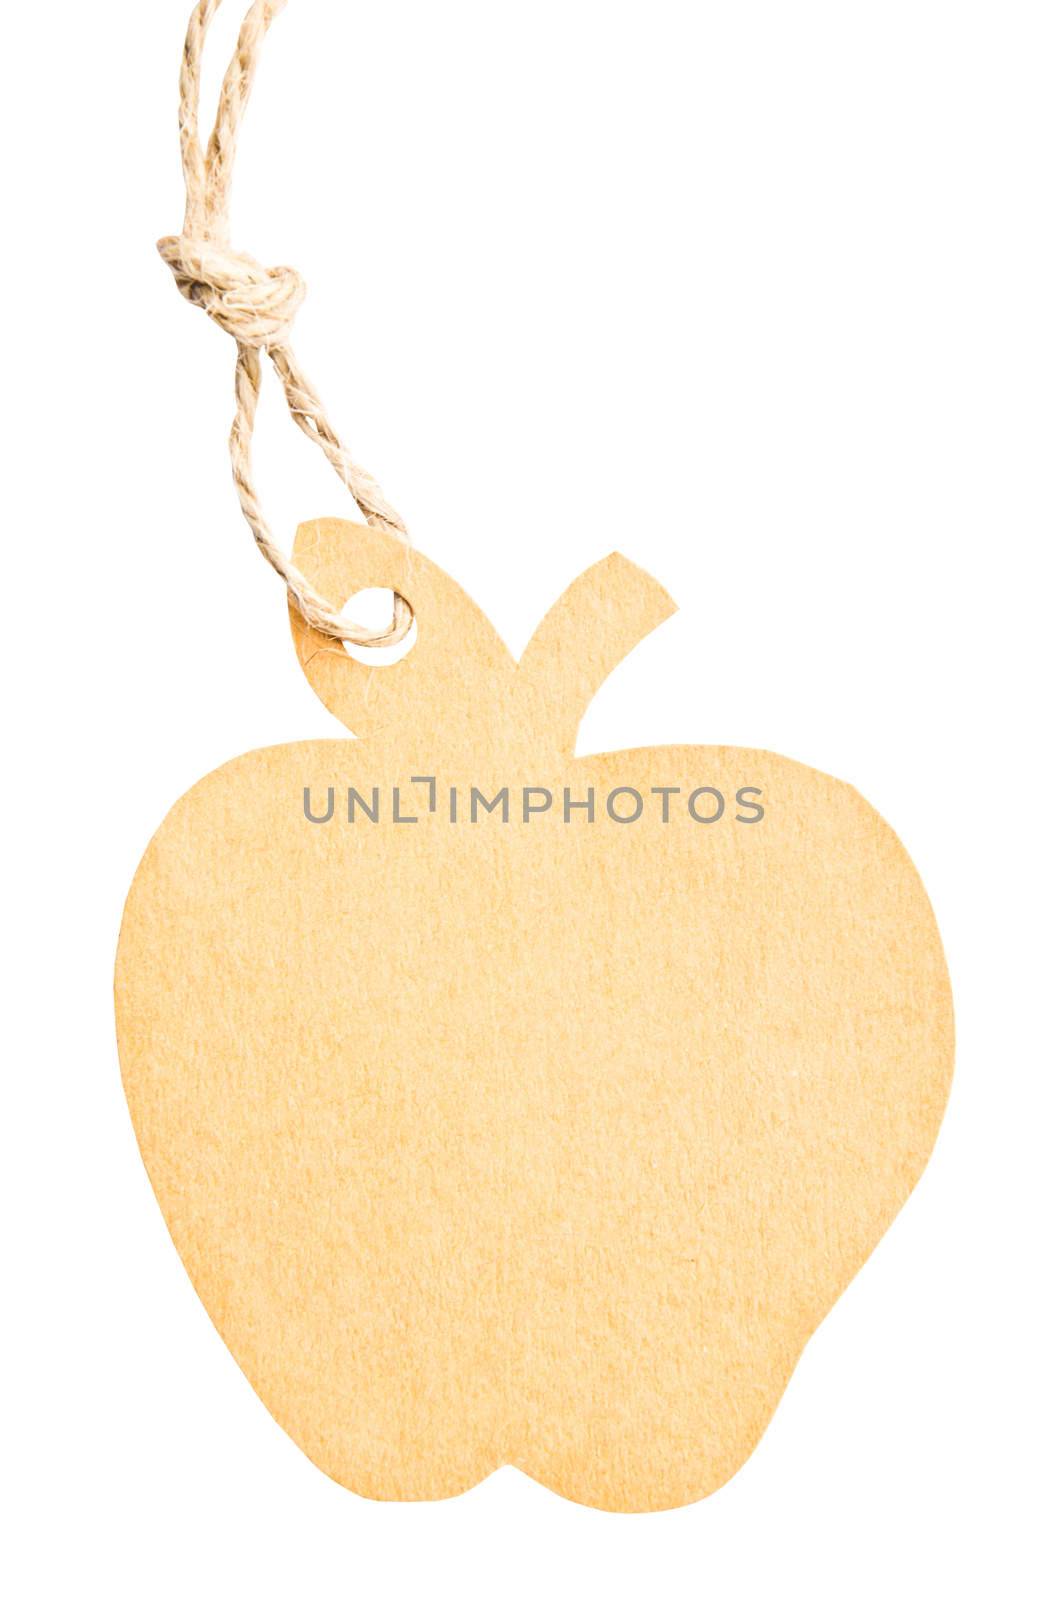 Blank tag tied with brown string isolated against a white background, clipping path